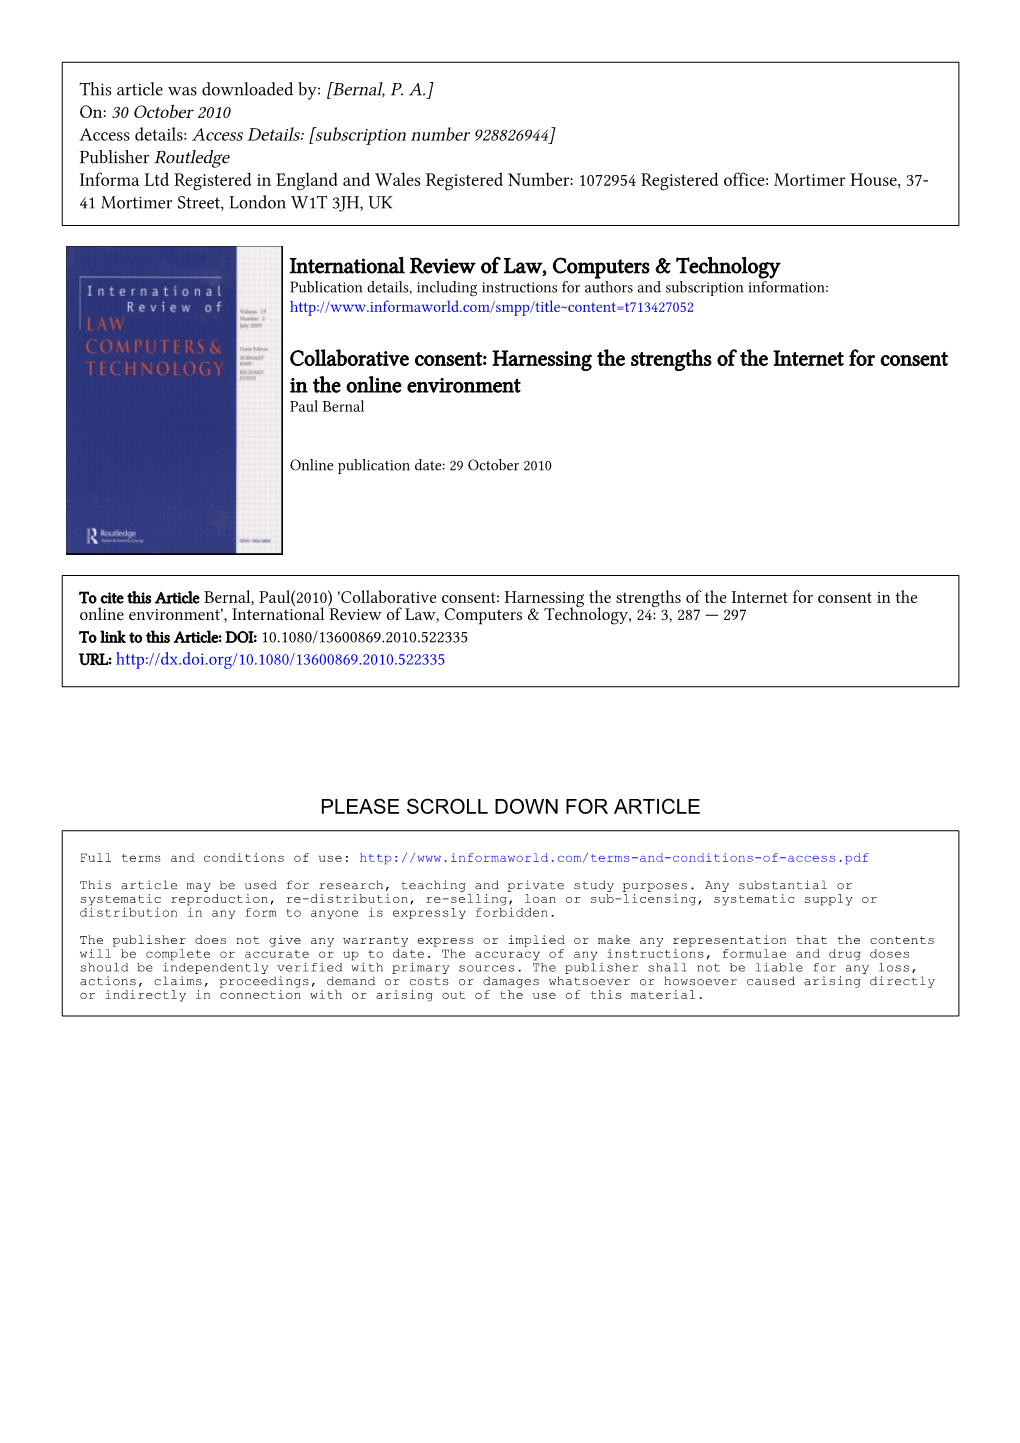 International Review of Law, Computers & Technology Collaborative Consent: Harnessing the Strengths of the Internet for Cons